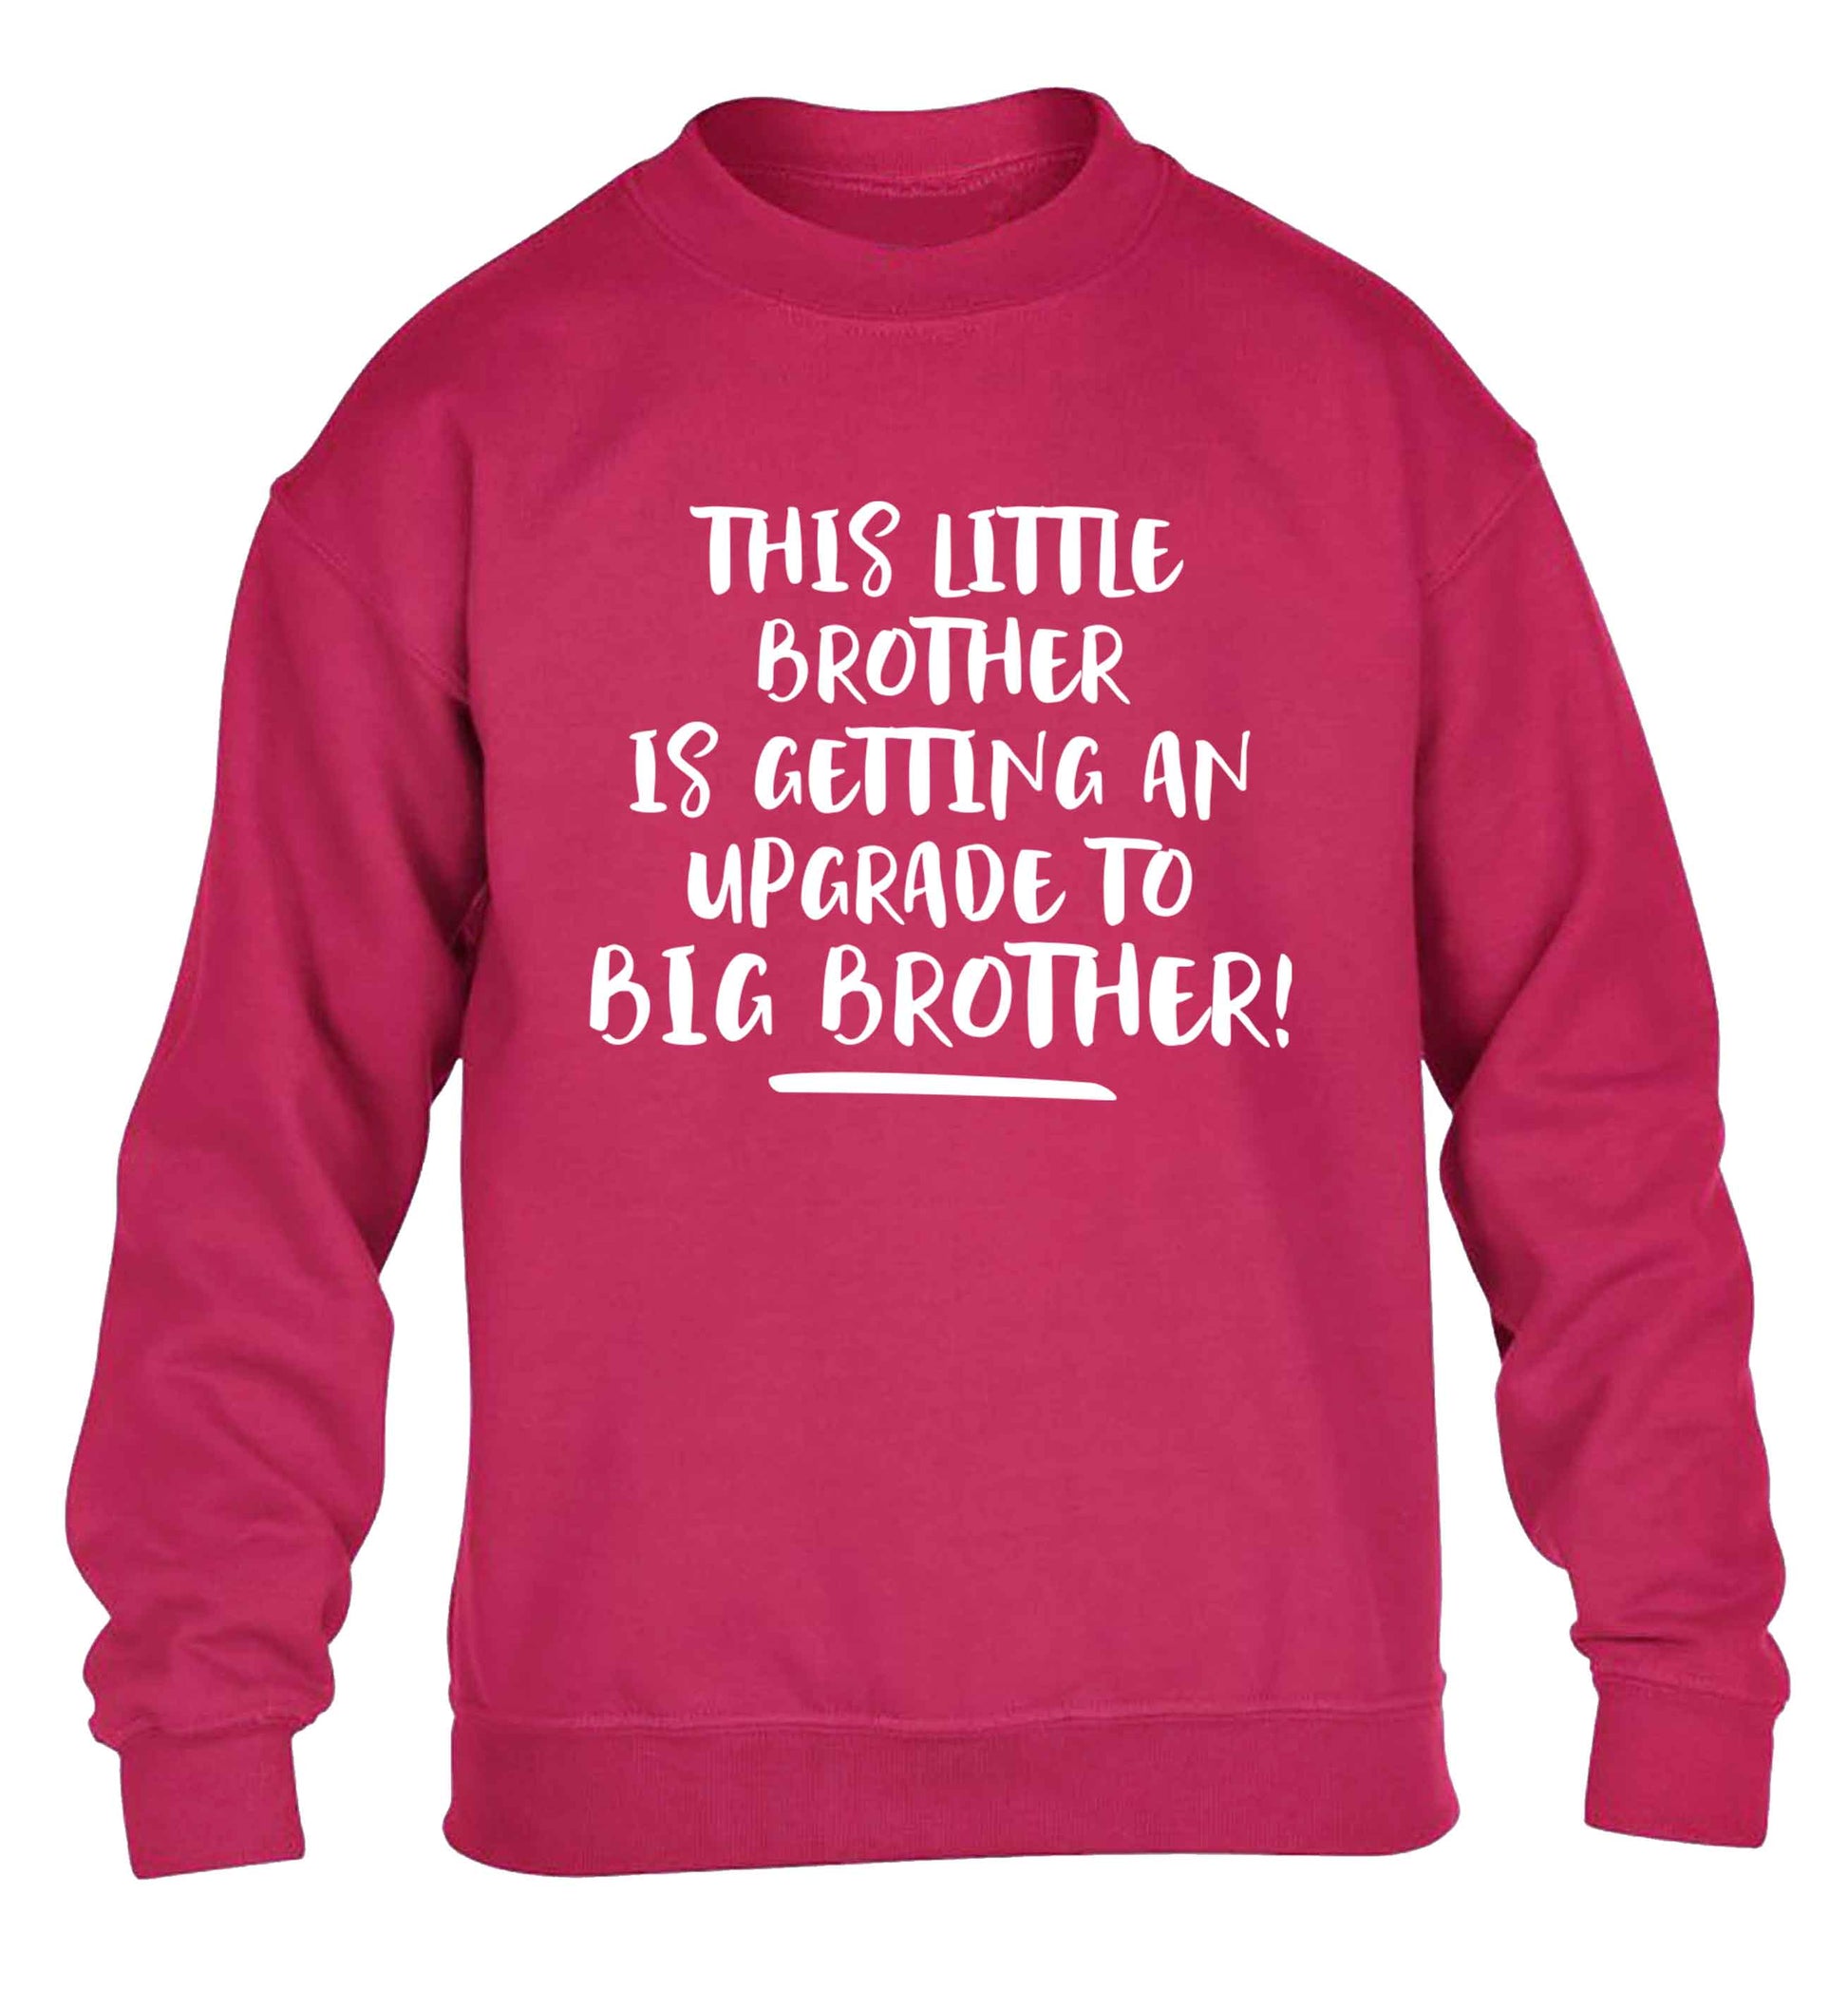 This little brother is getting an upgrade to big brother! children's pink sweater 12-13 Years